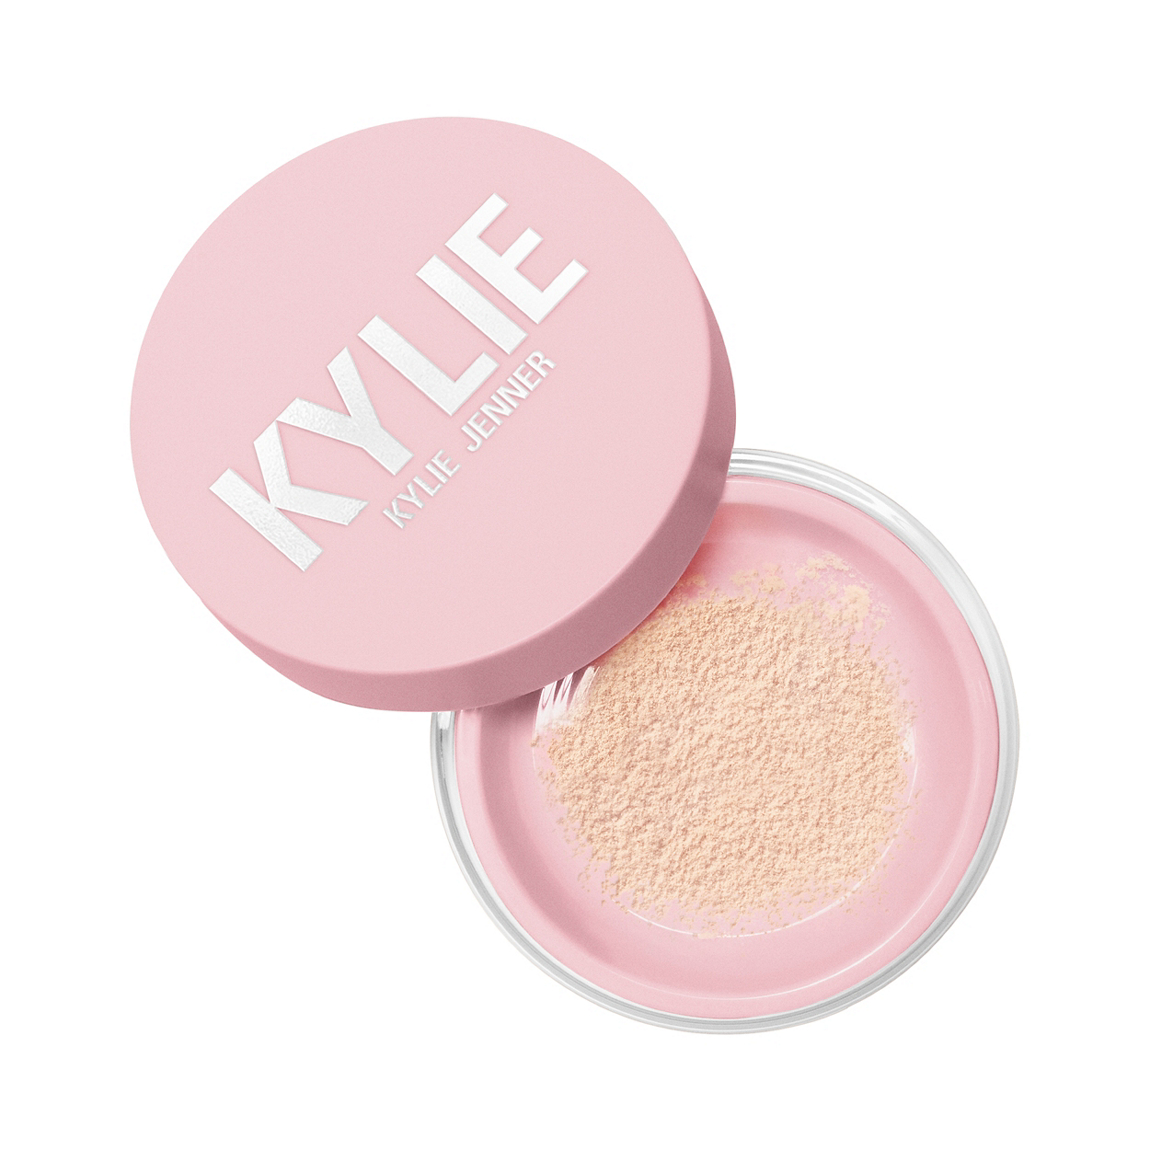 kylie cosmetics review